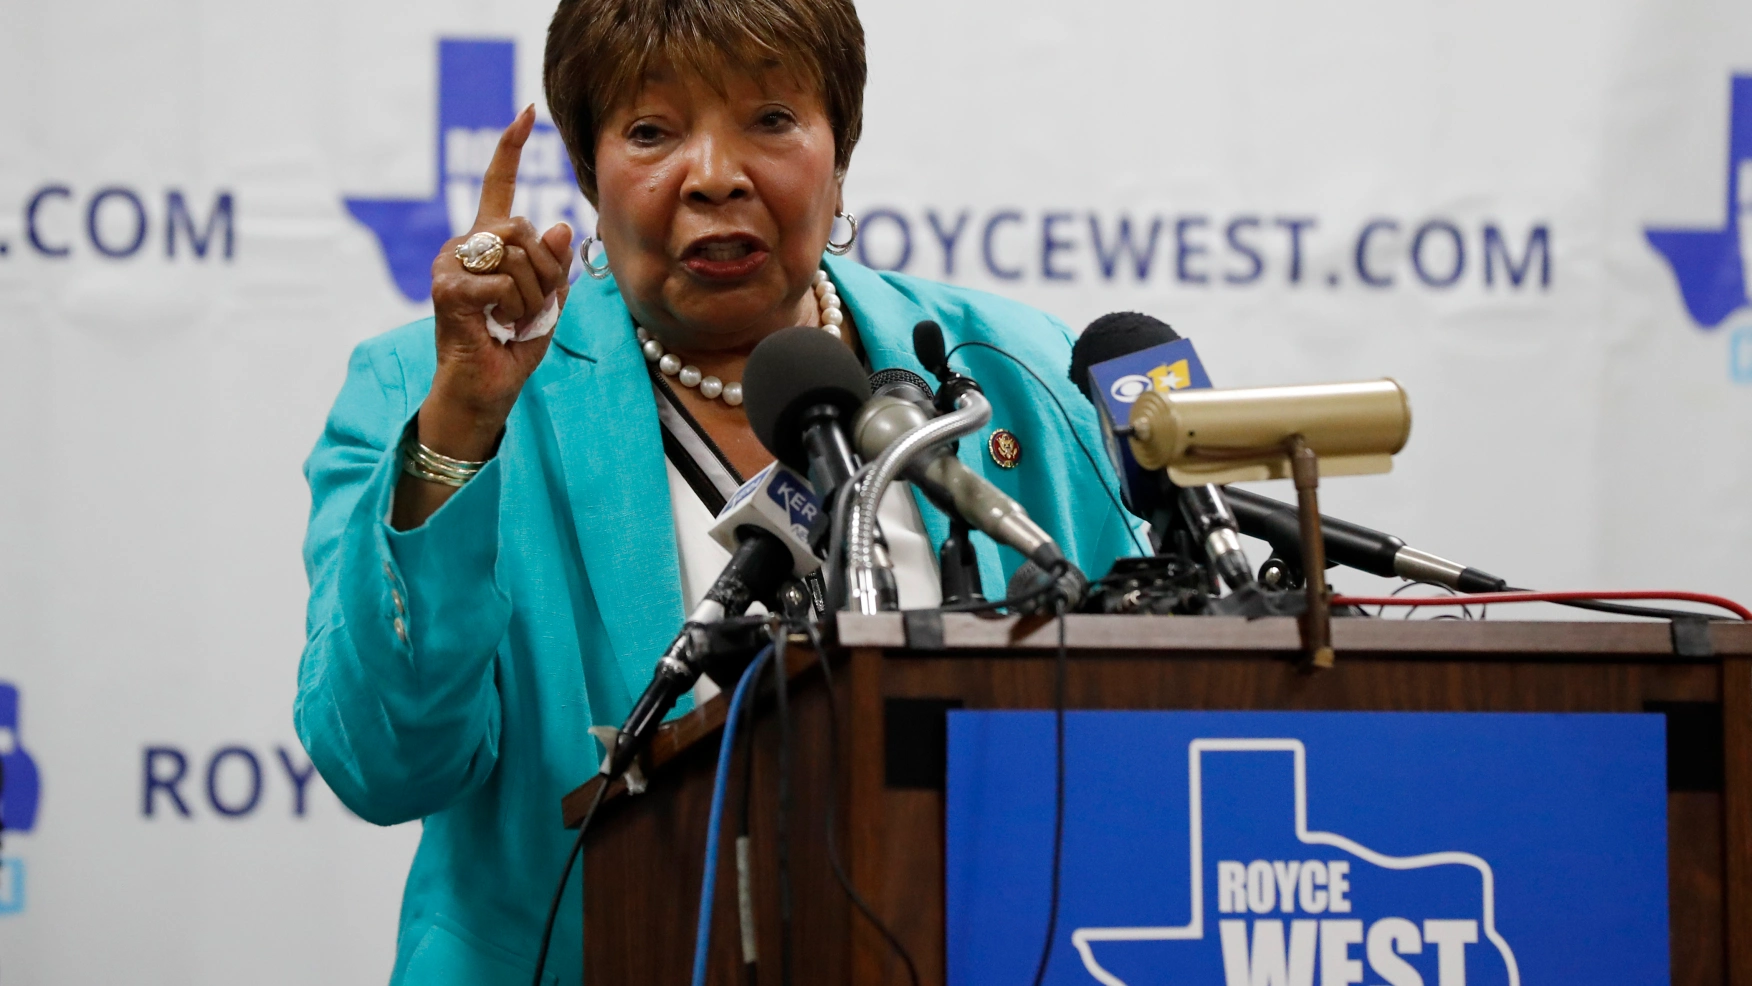 Rep. Eddie Bernice Johnson, D-Texas, makes comments as she introduces State Senator Royce West at a rally where West announced his bid to run for the US Senate in Dallas, Monday, July 22, 2019. Johnson says she won’t seek re-election in 2022 after 30 years in Congress. The 85-year-old trailblazing Black Democrat made her announcement Saturday, Nov. 20, 2021 in Dallas. (AP Photo/Tony Gutierrez, File)